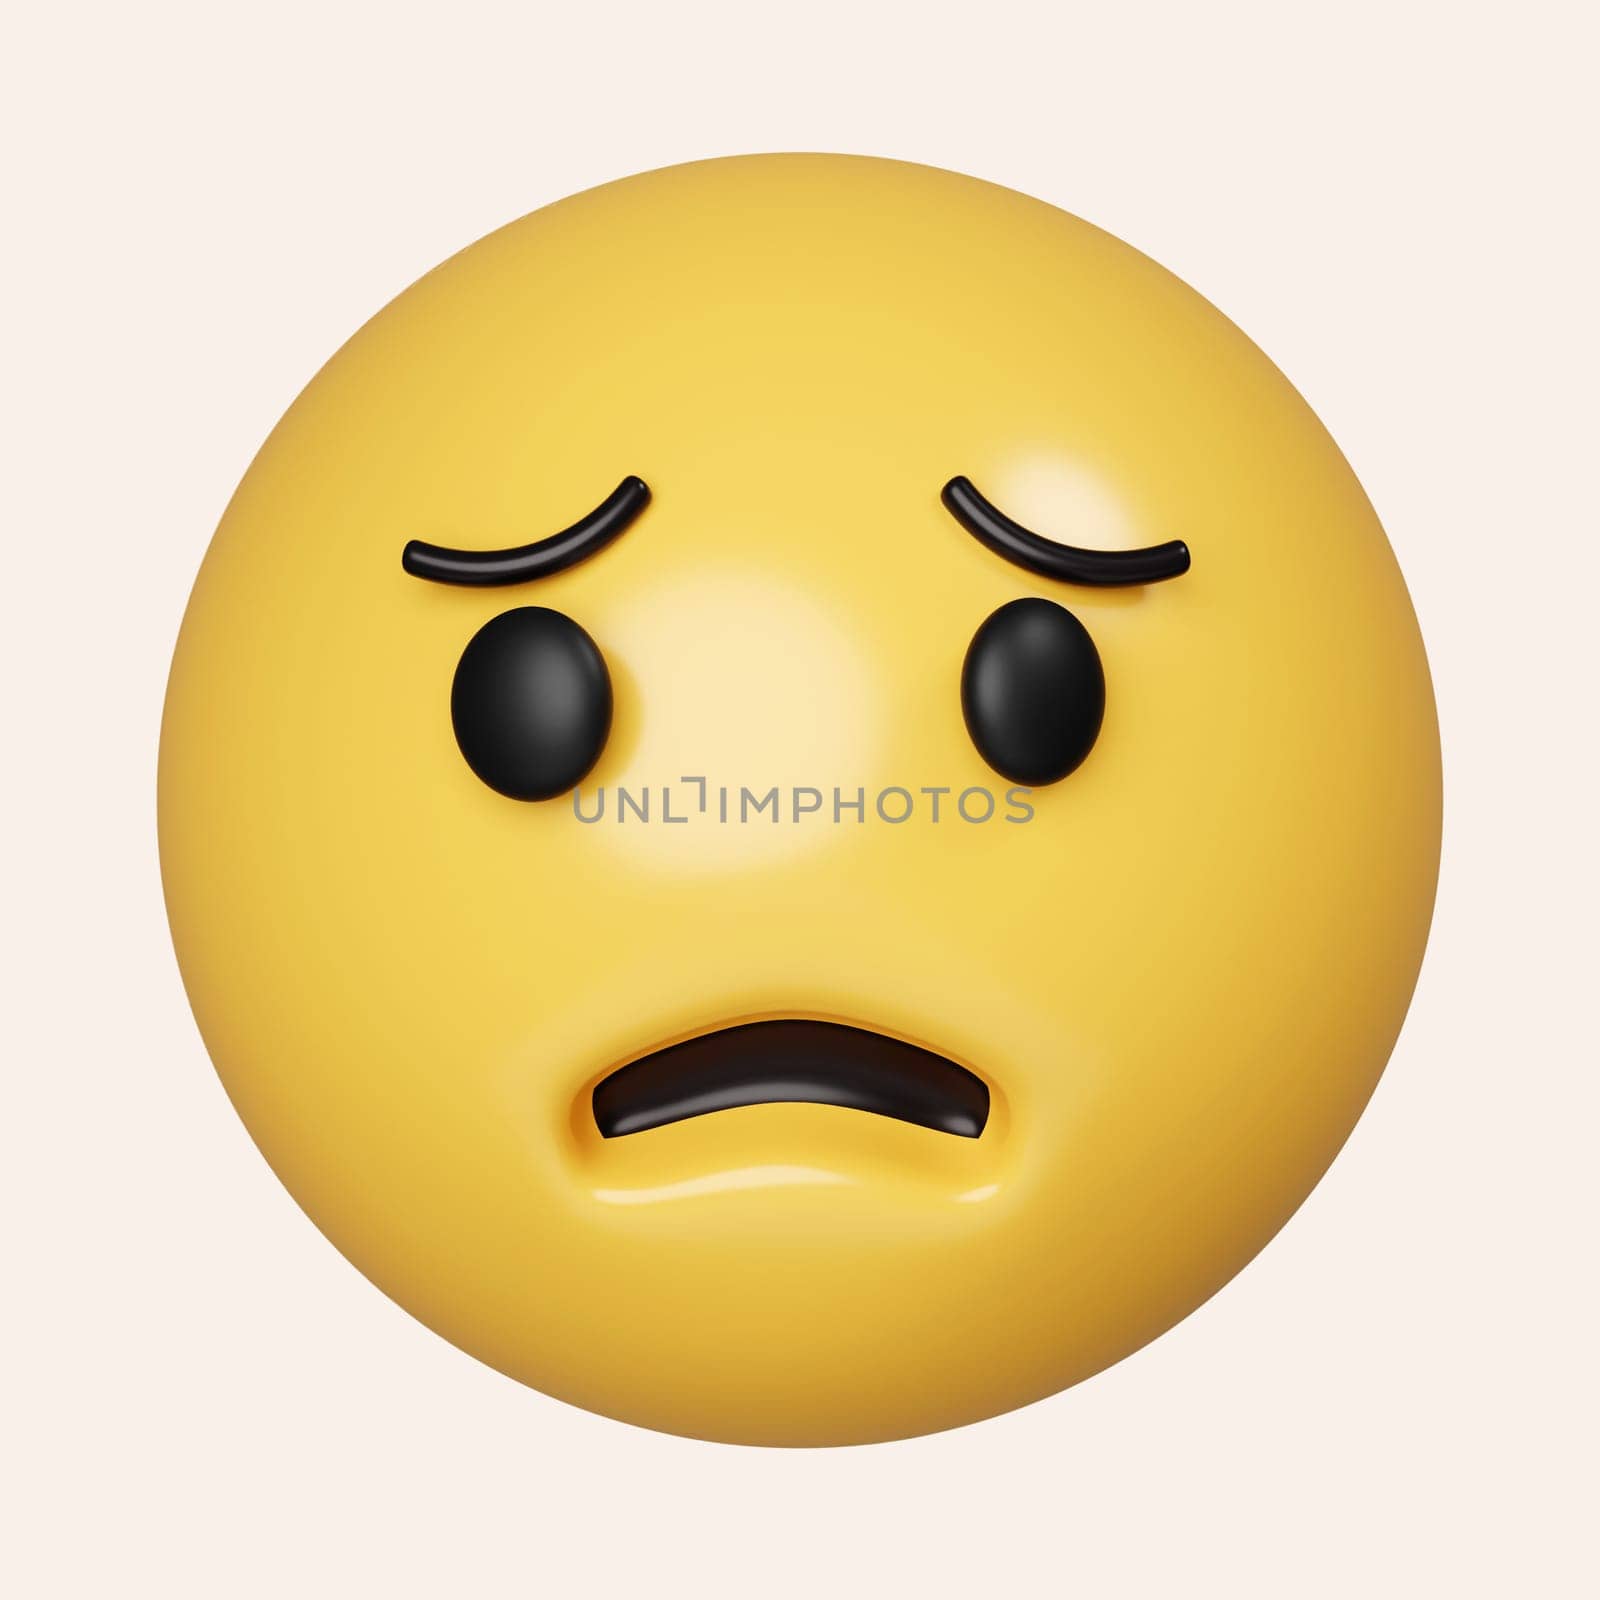 3d concerned about colored emoji sticker icon. Element of emoji. icon isolated on gray background. 3d rendering illustration. Clipping path. by meepiangraphic